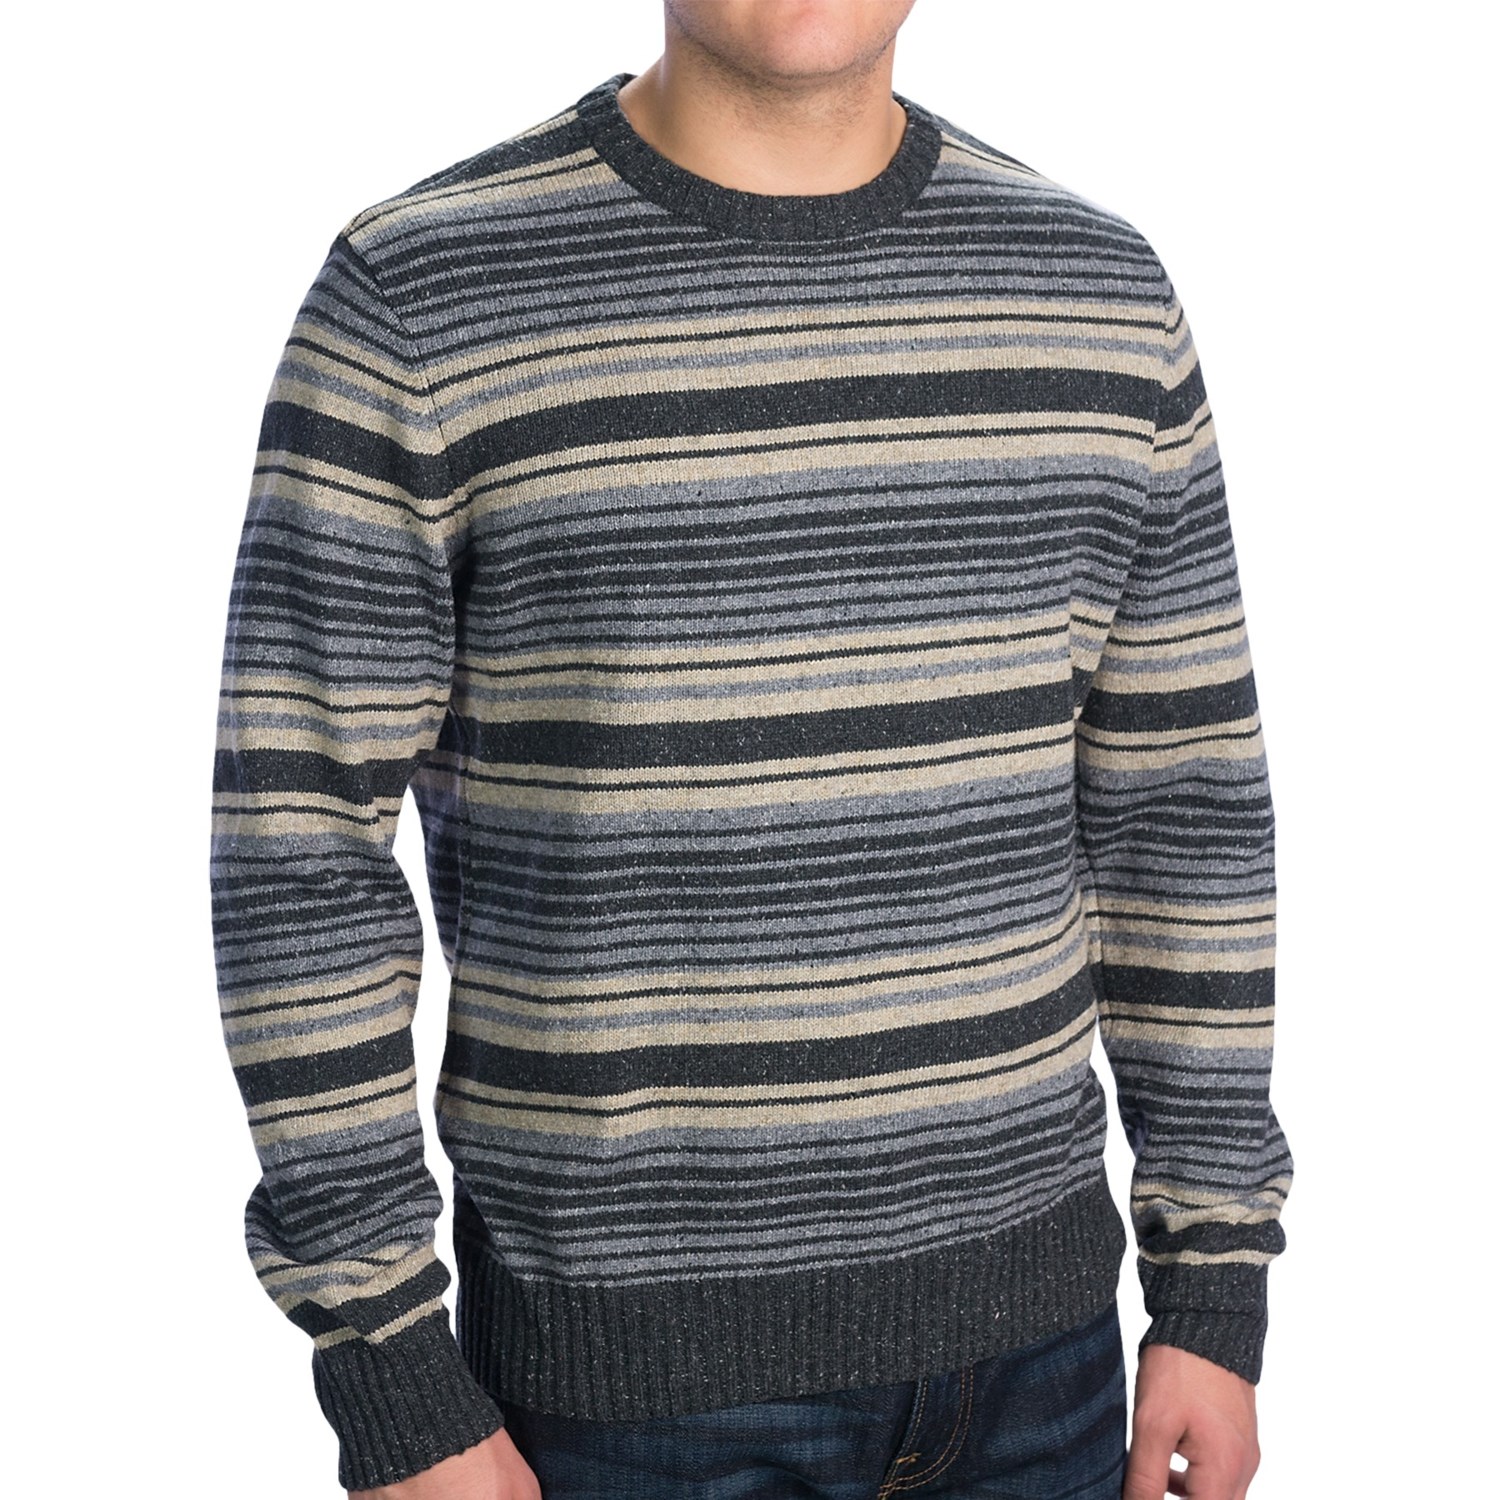 Dockers Allover Ombre Stripe Sweater (For Men) 8282X - Save 67%